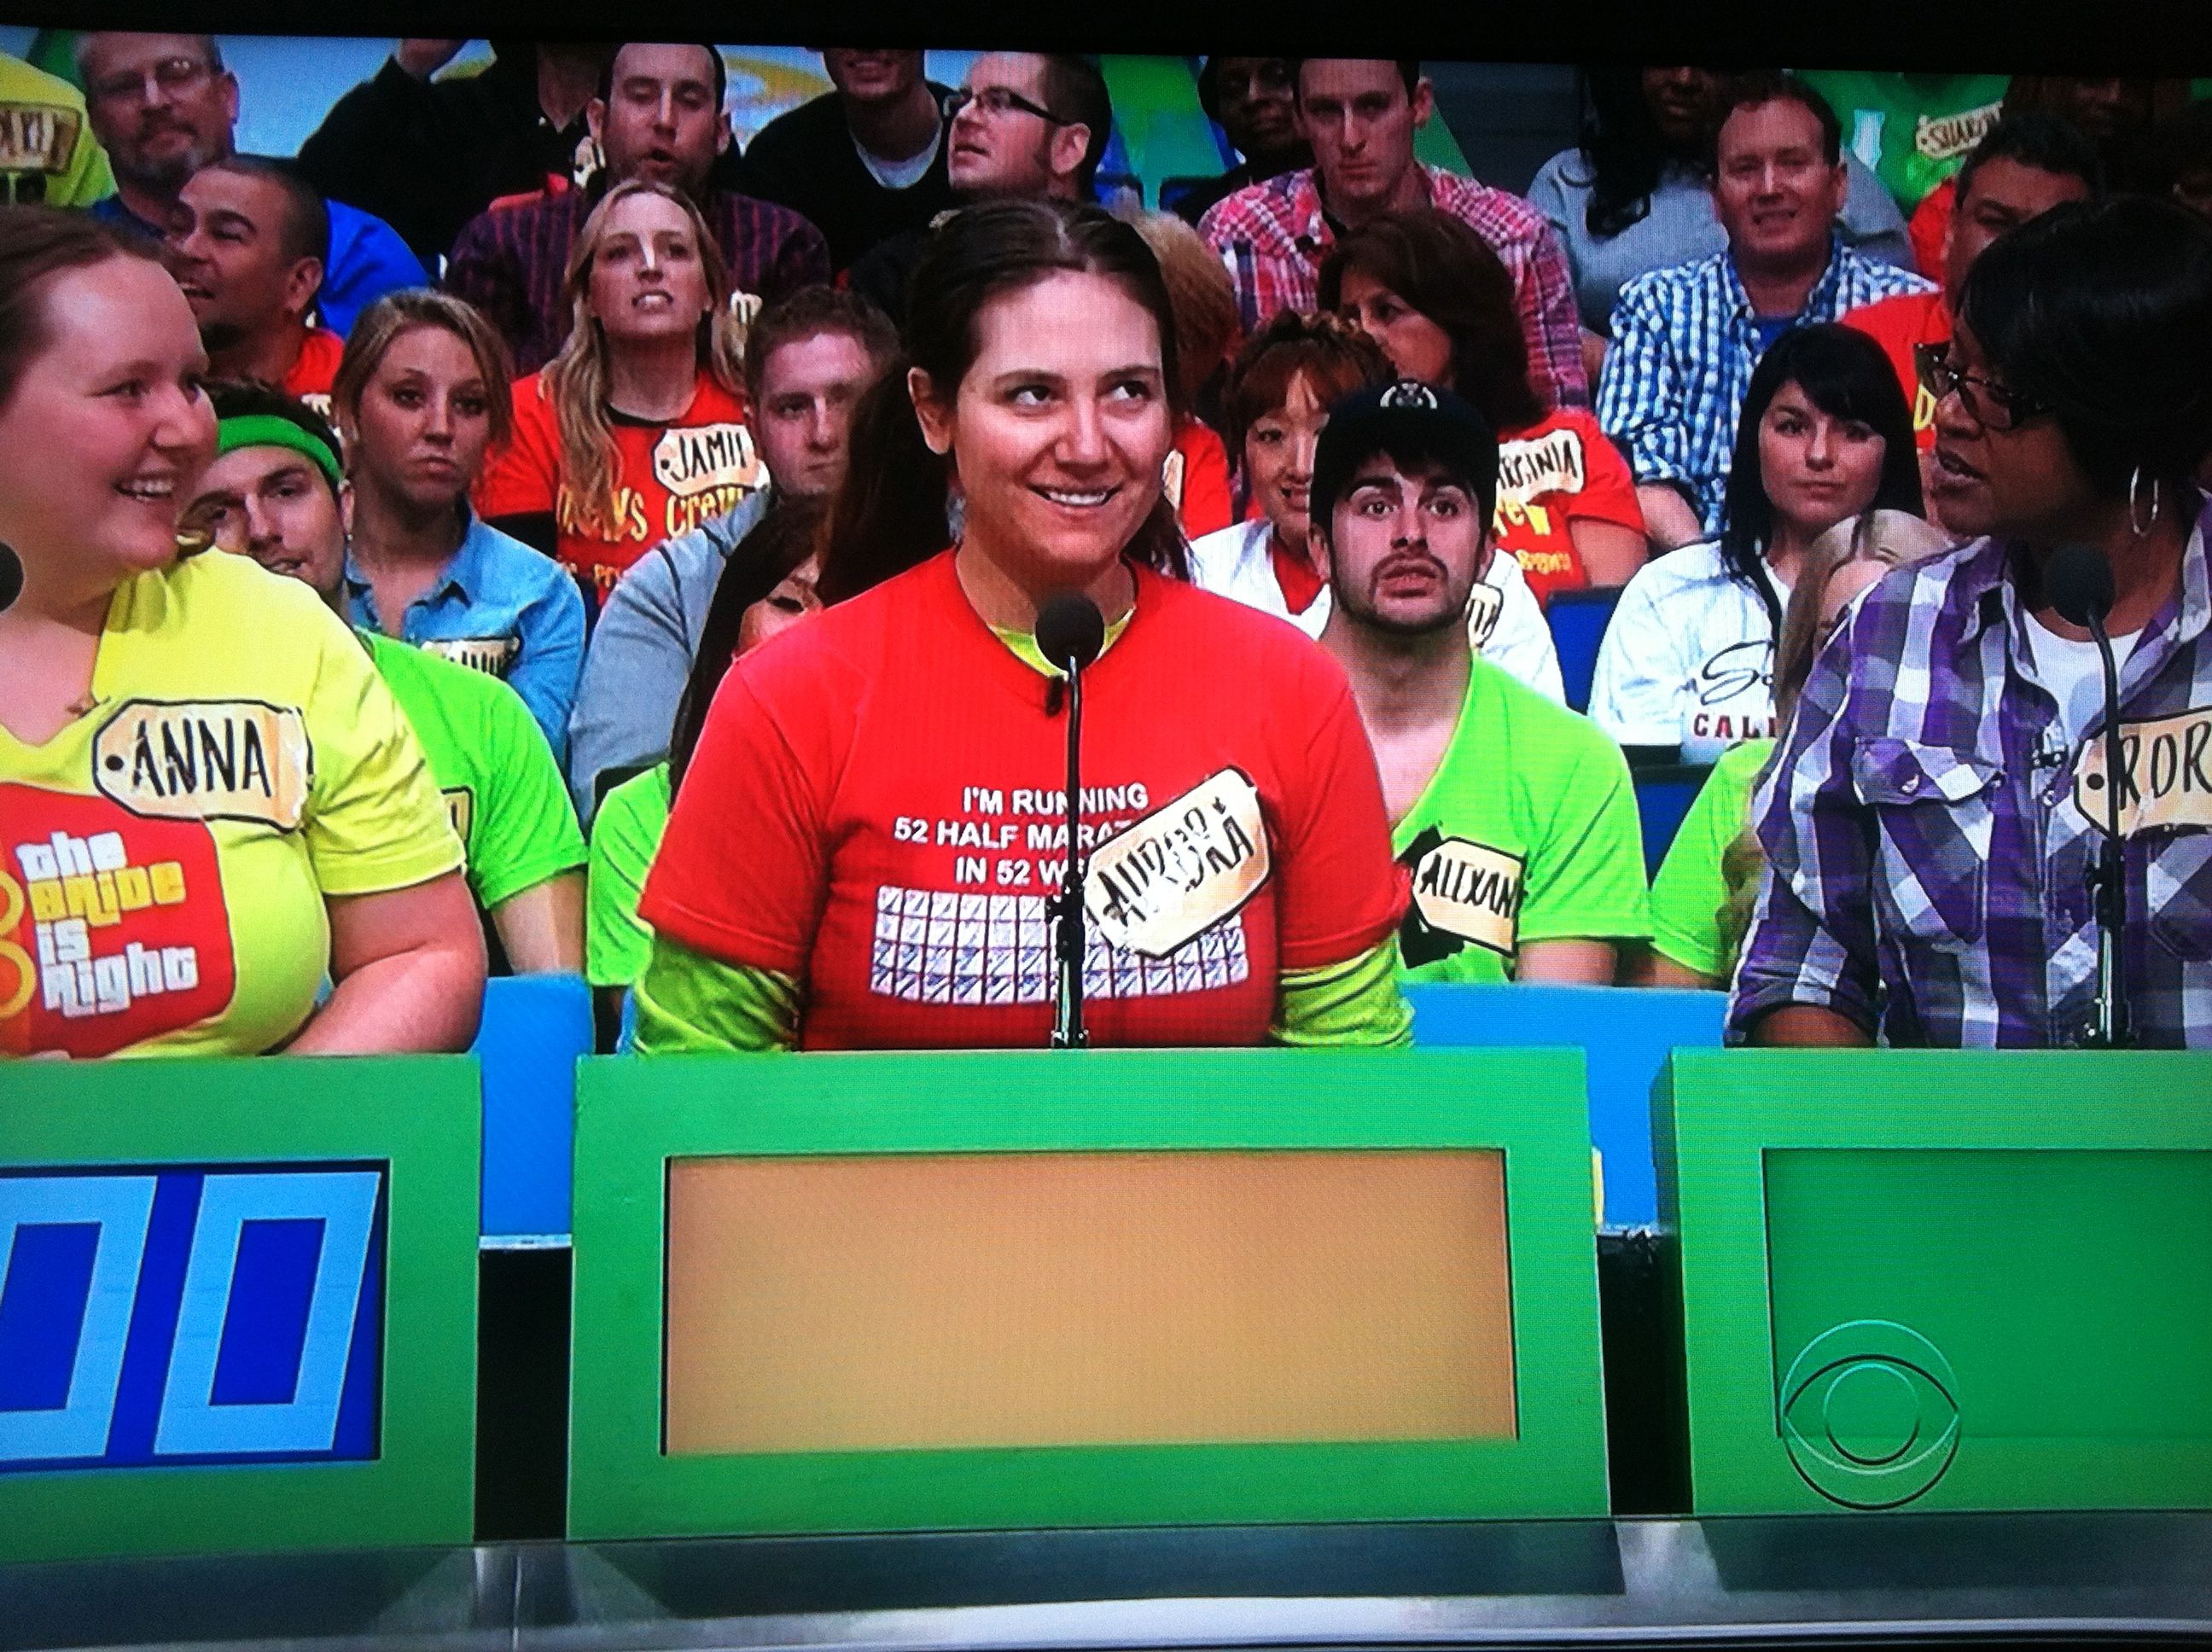 Aurora De Lucia making her bid on camcorders on contestant's row of The Price is Right